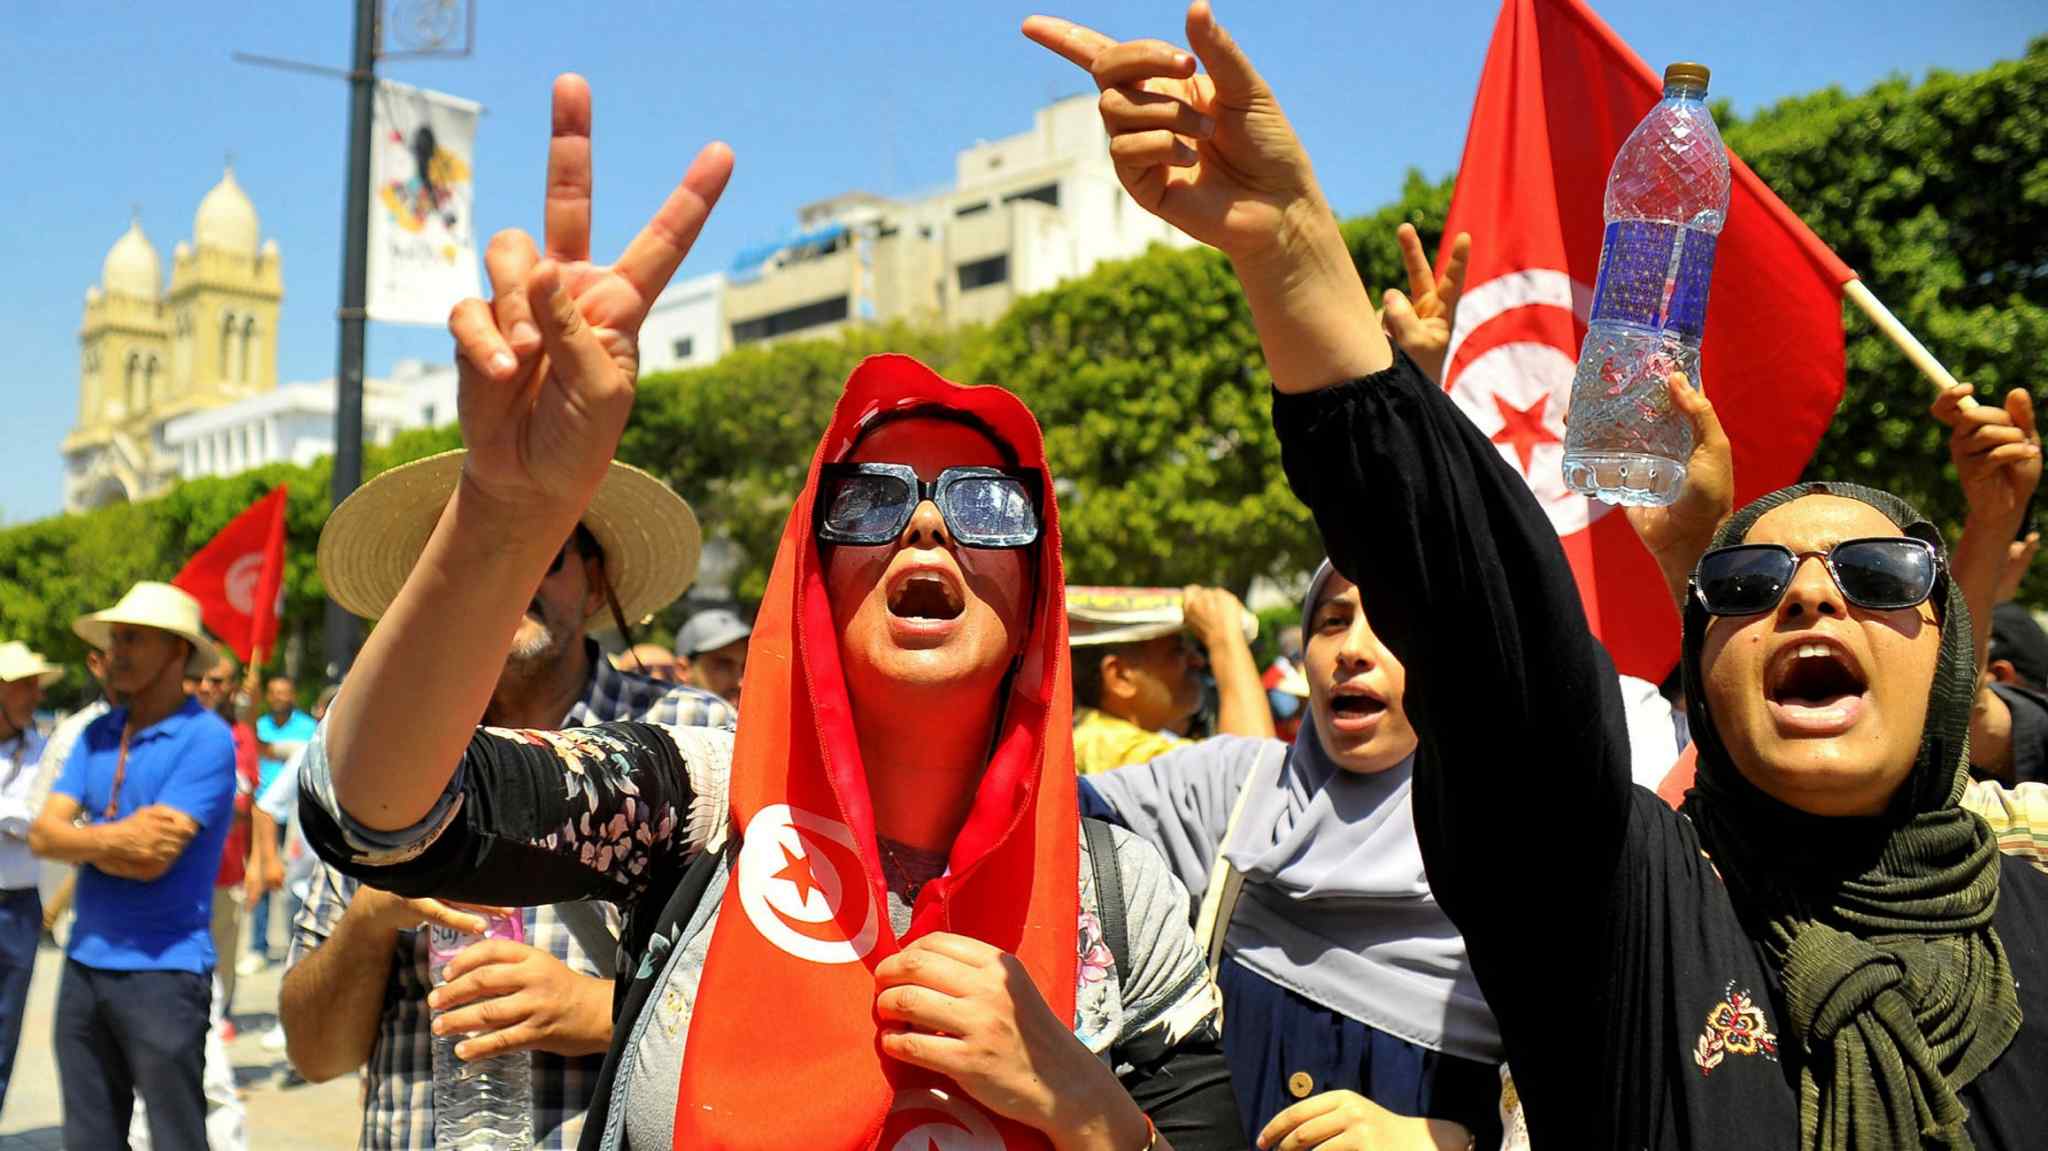 ‘Afraid for the freedoms’: Opposition warns over Tunisia’s new constitution 